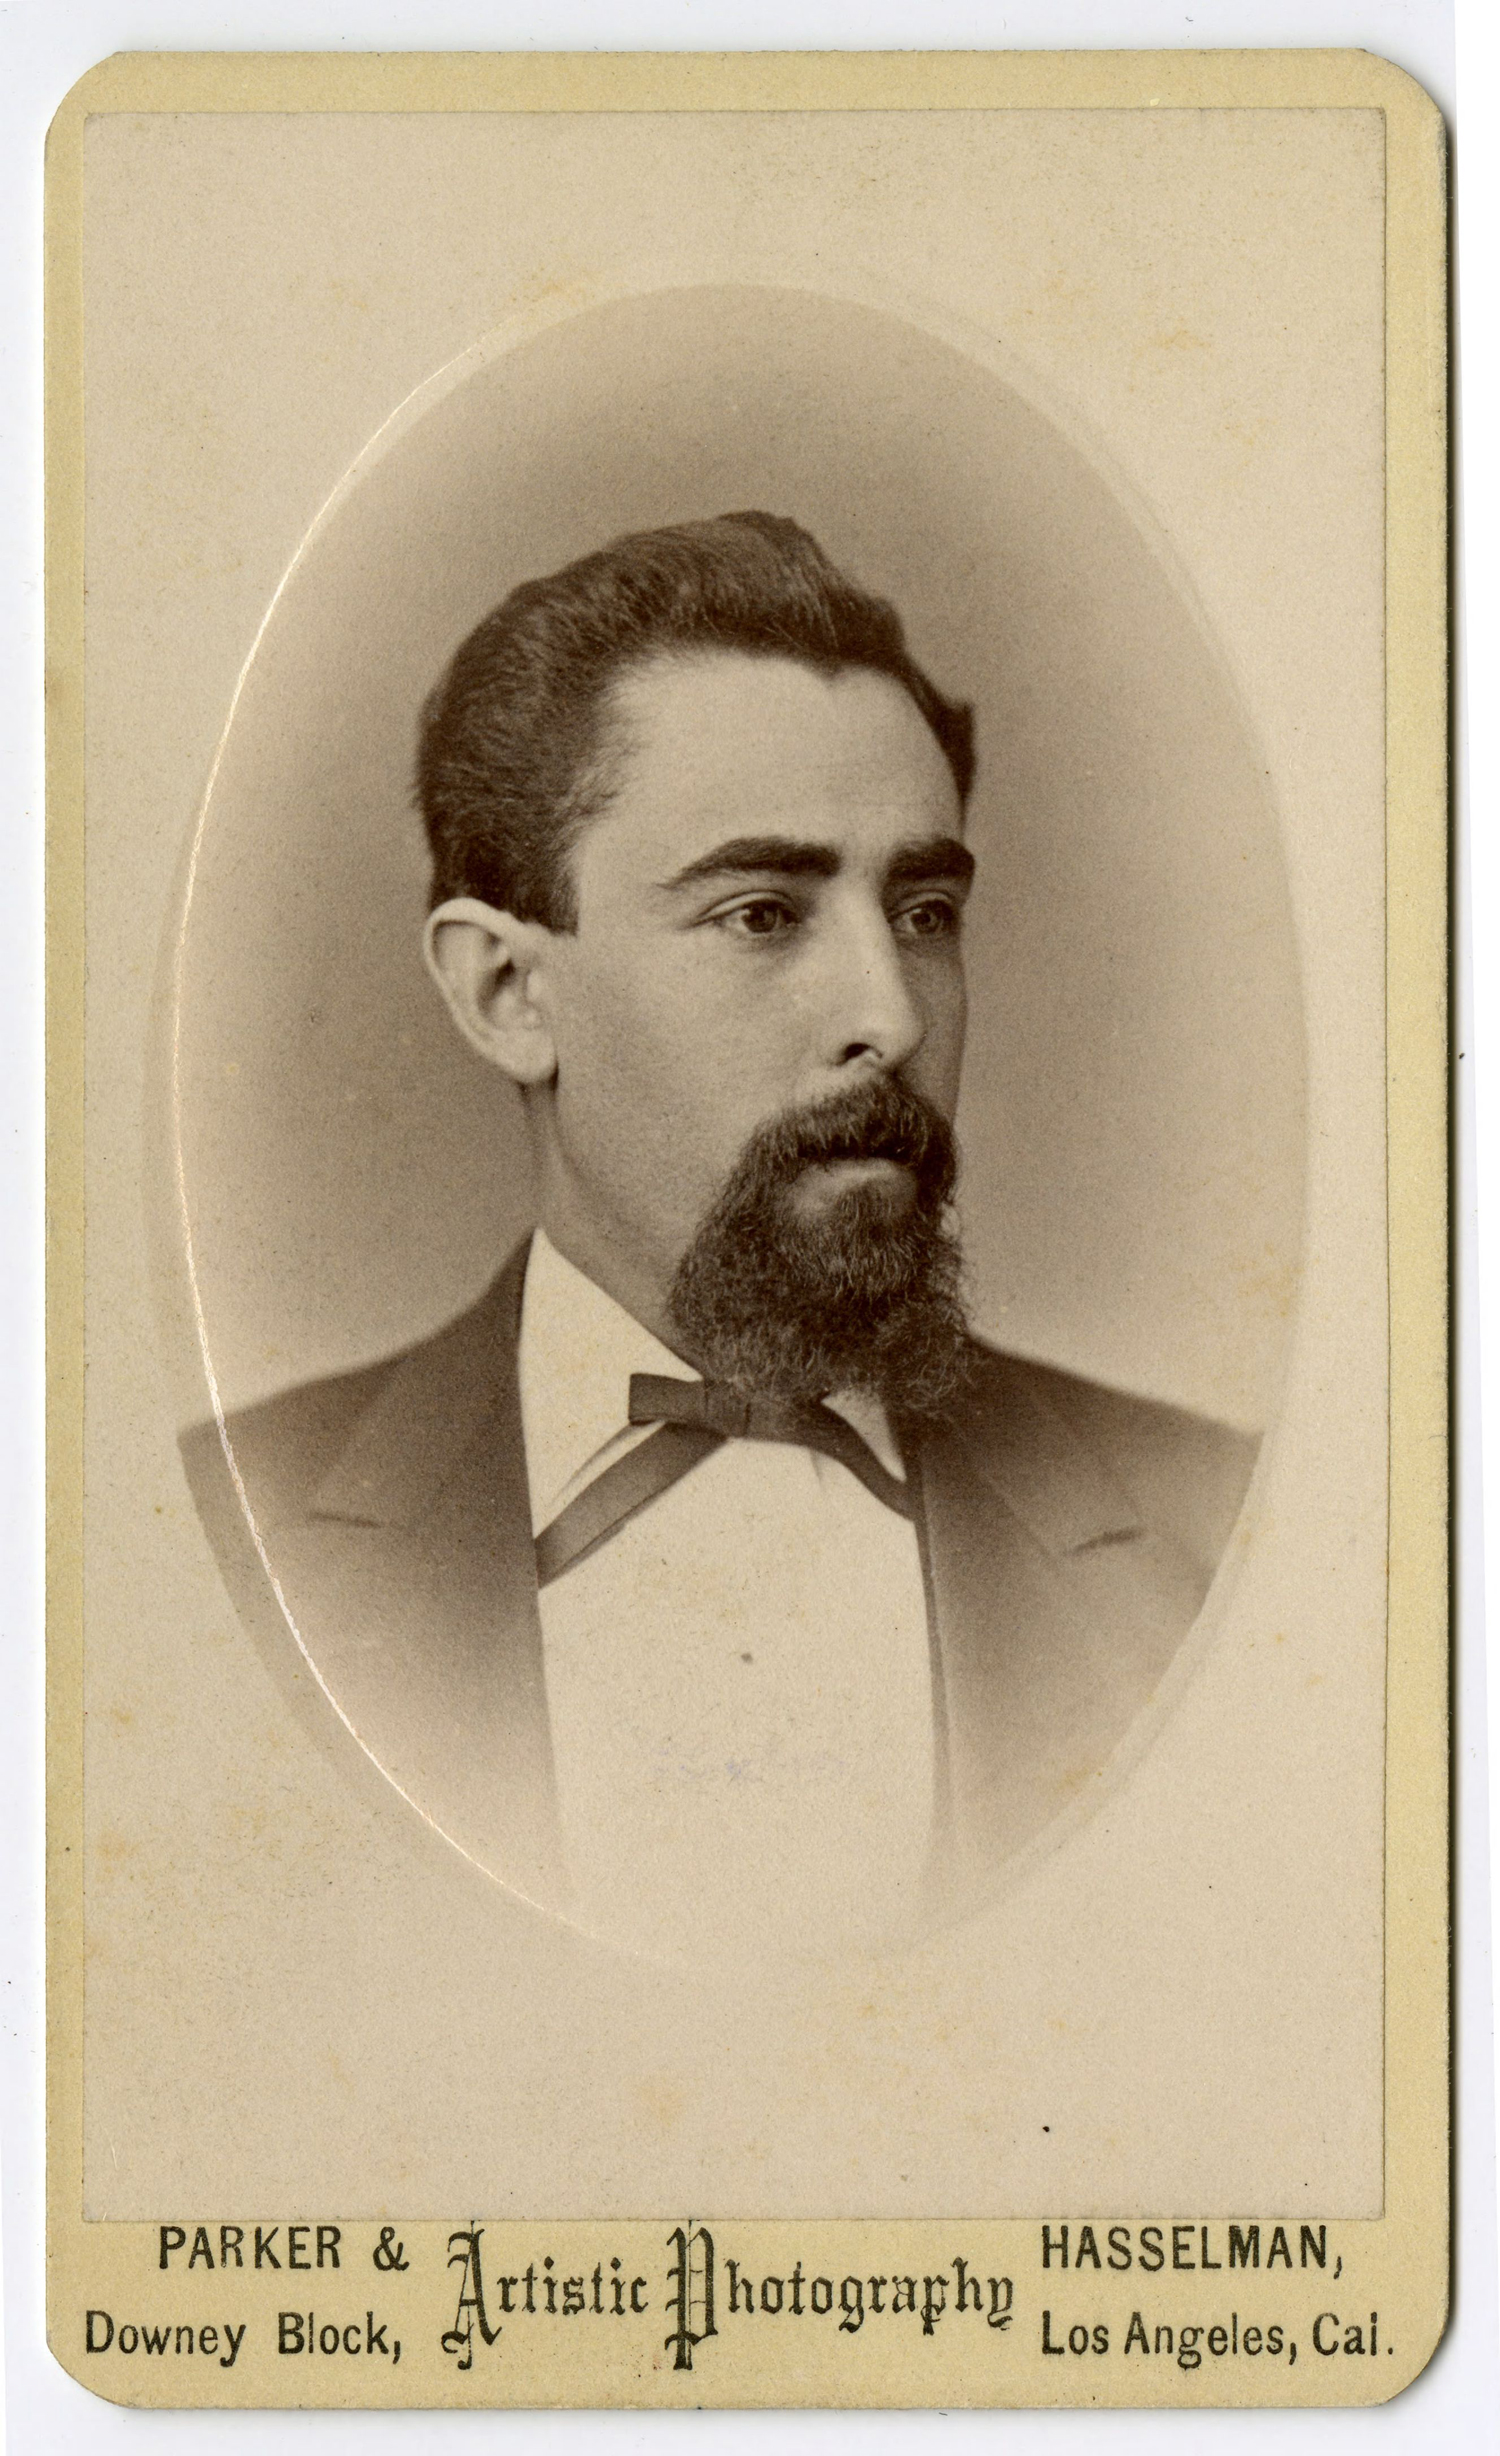 19th-century carte de visite showing a man with mustache and beard in a suit and string bow tie